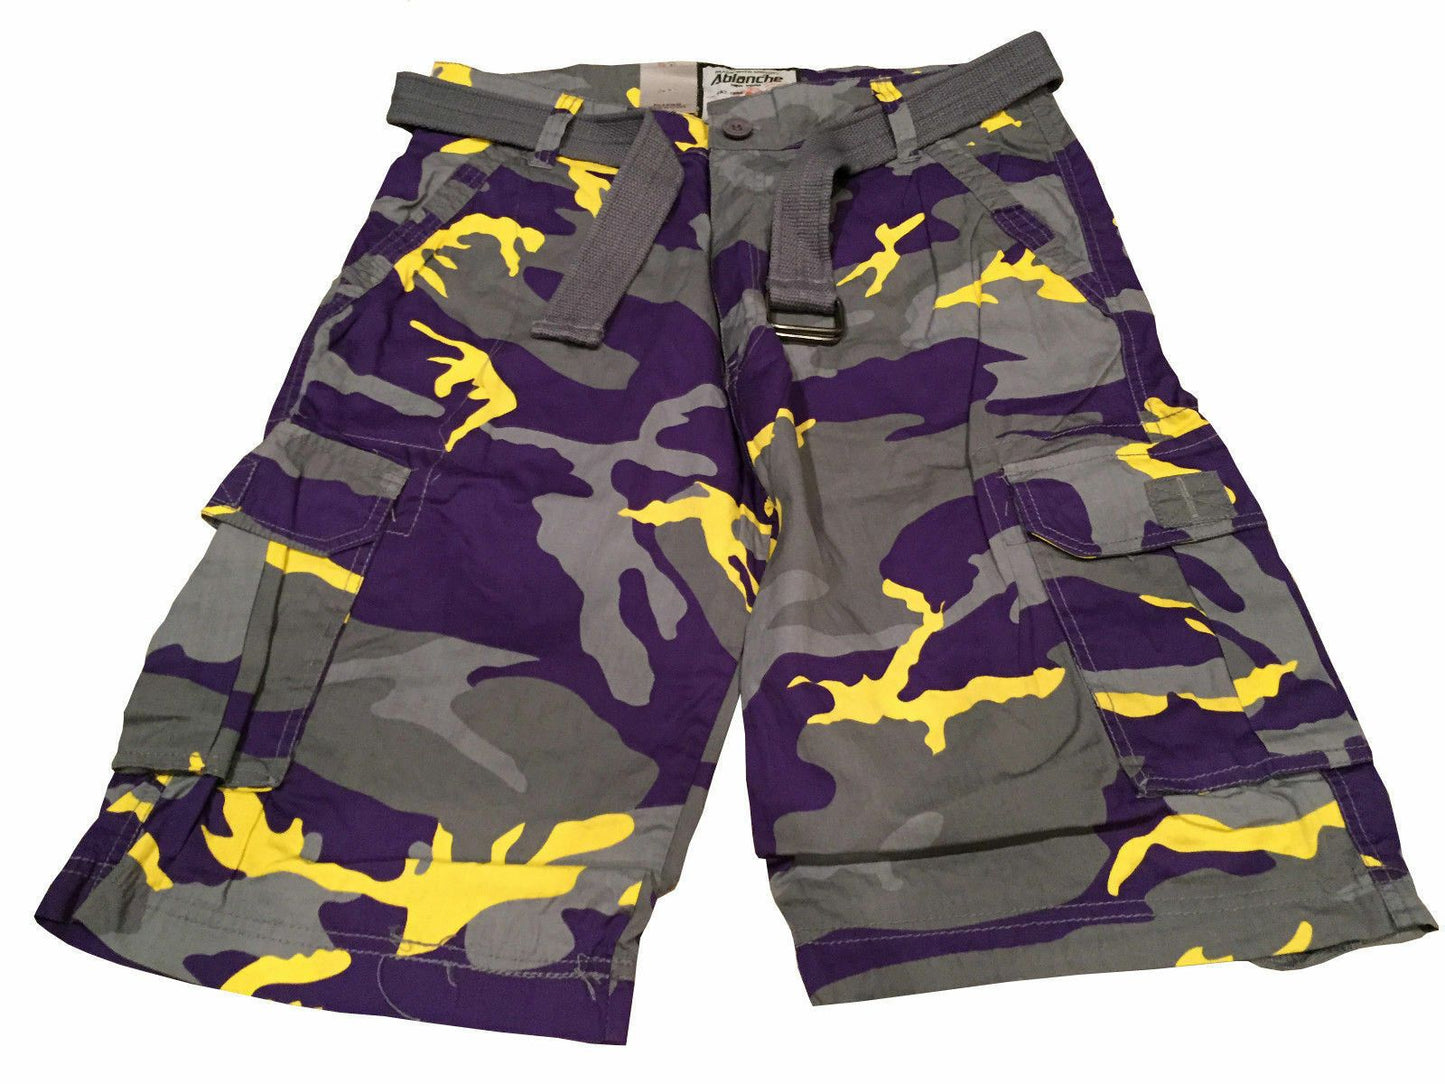 Premium Mens Camouflage Tactical Cargo Shorts - Westfield Retailers